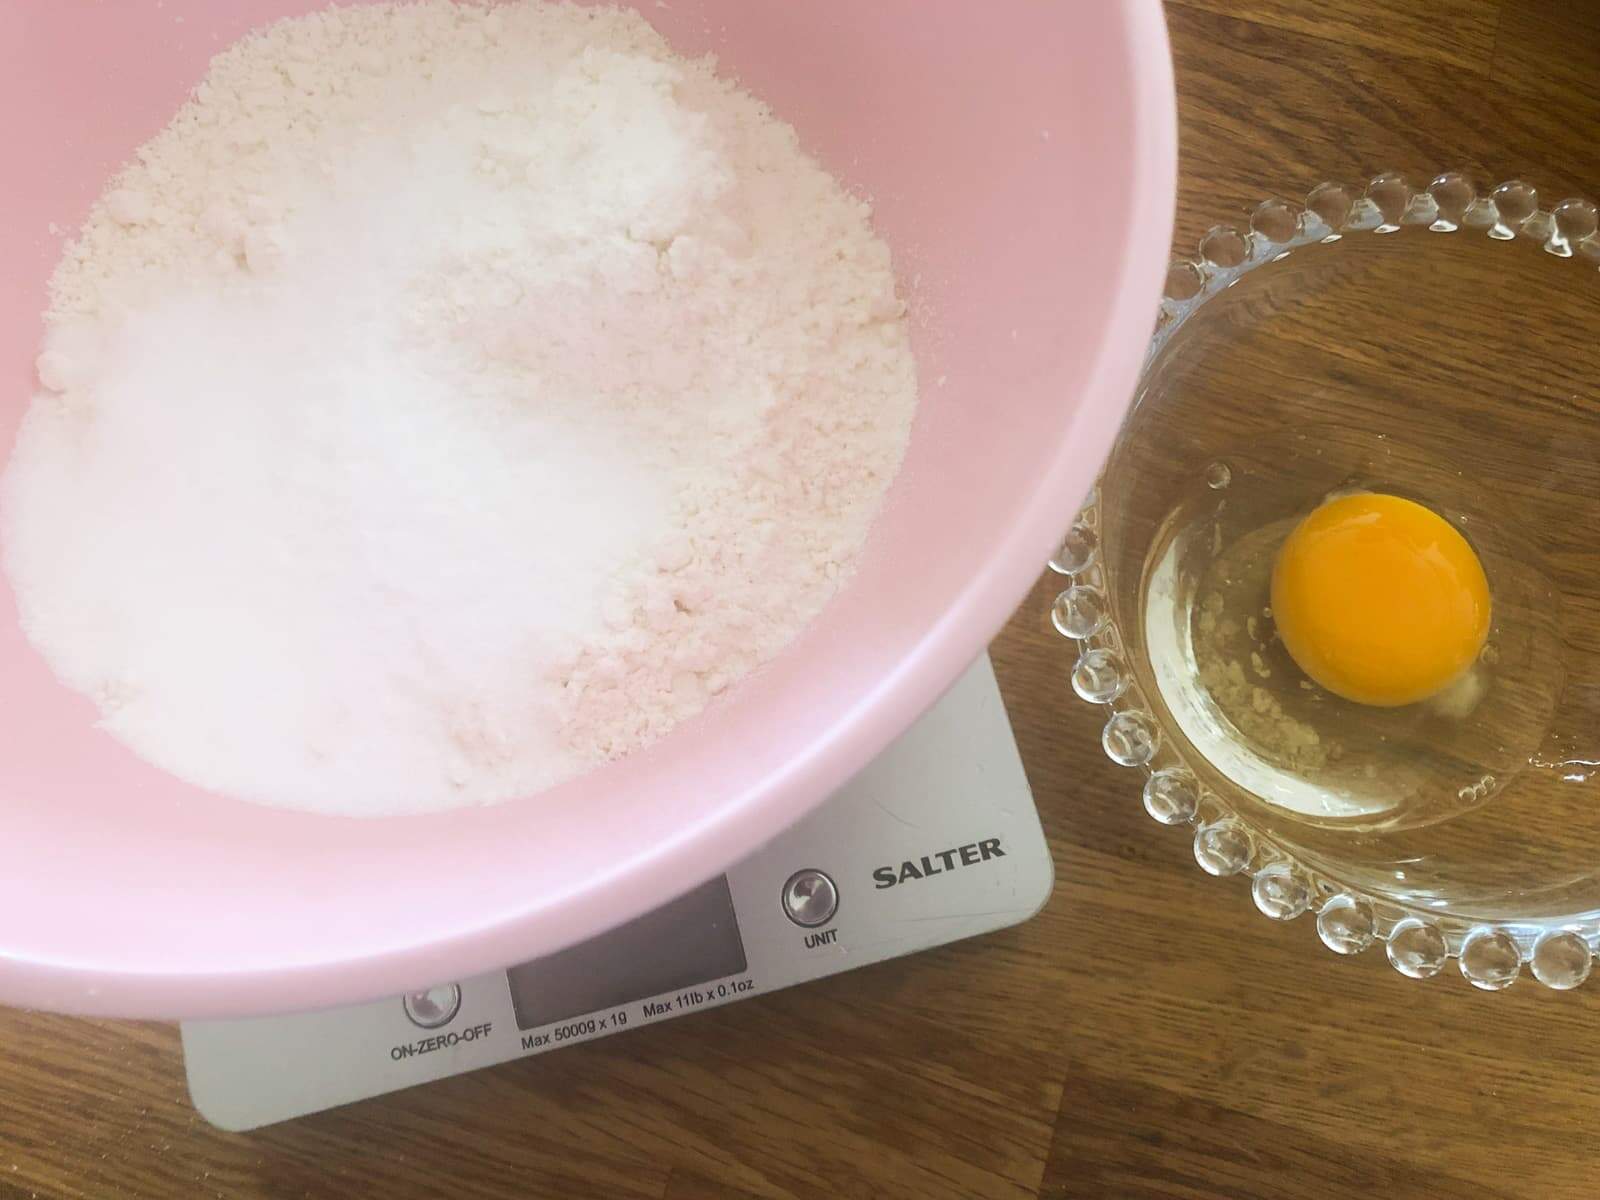 A set of scales with a pink bowl containing flour and sugar weighed out and a smaller glass bowl with an egg ready to be mixed together.